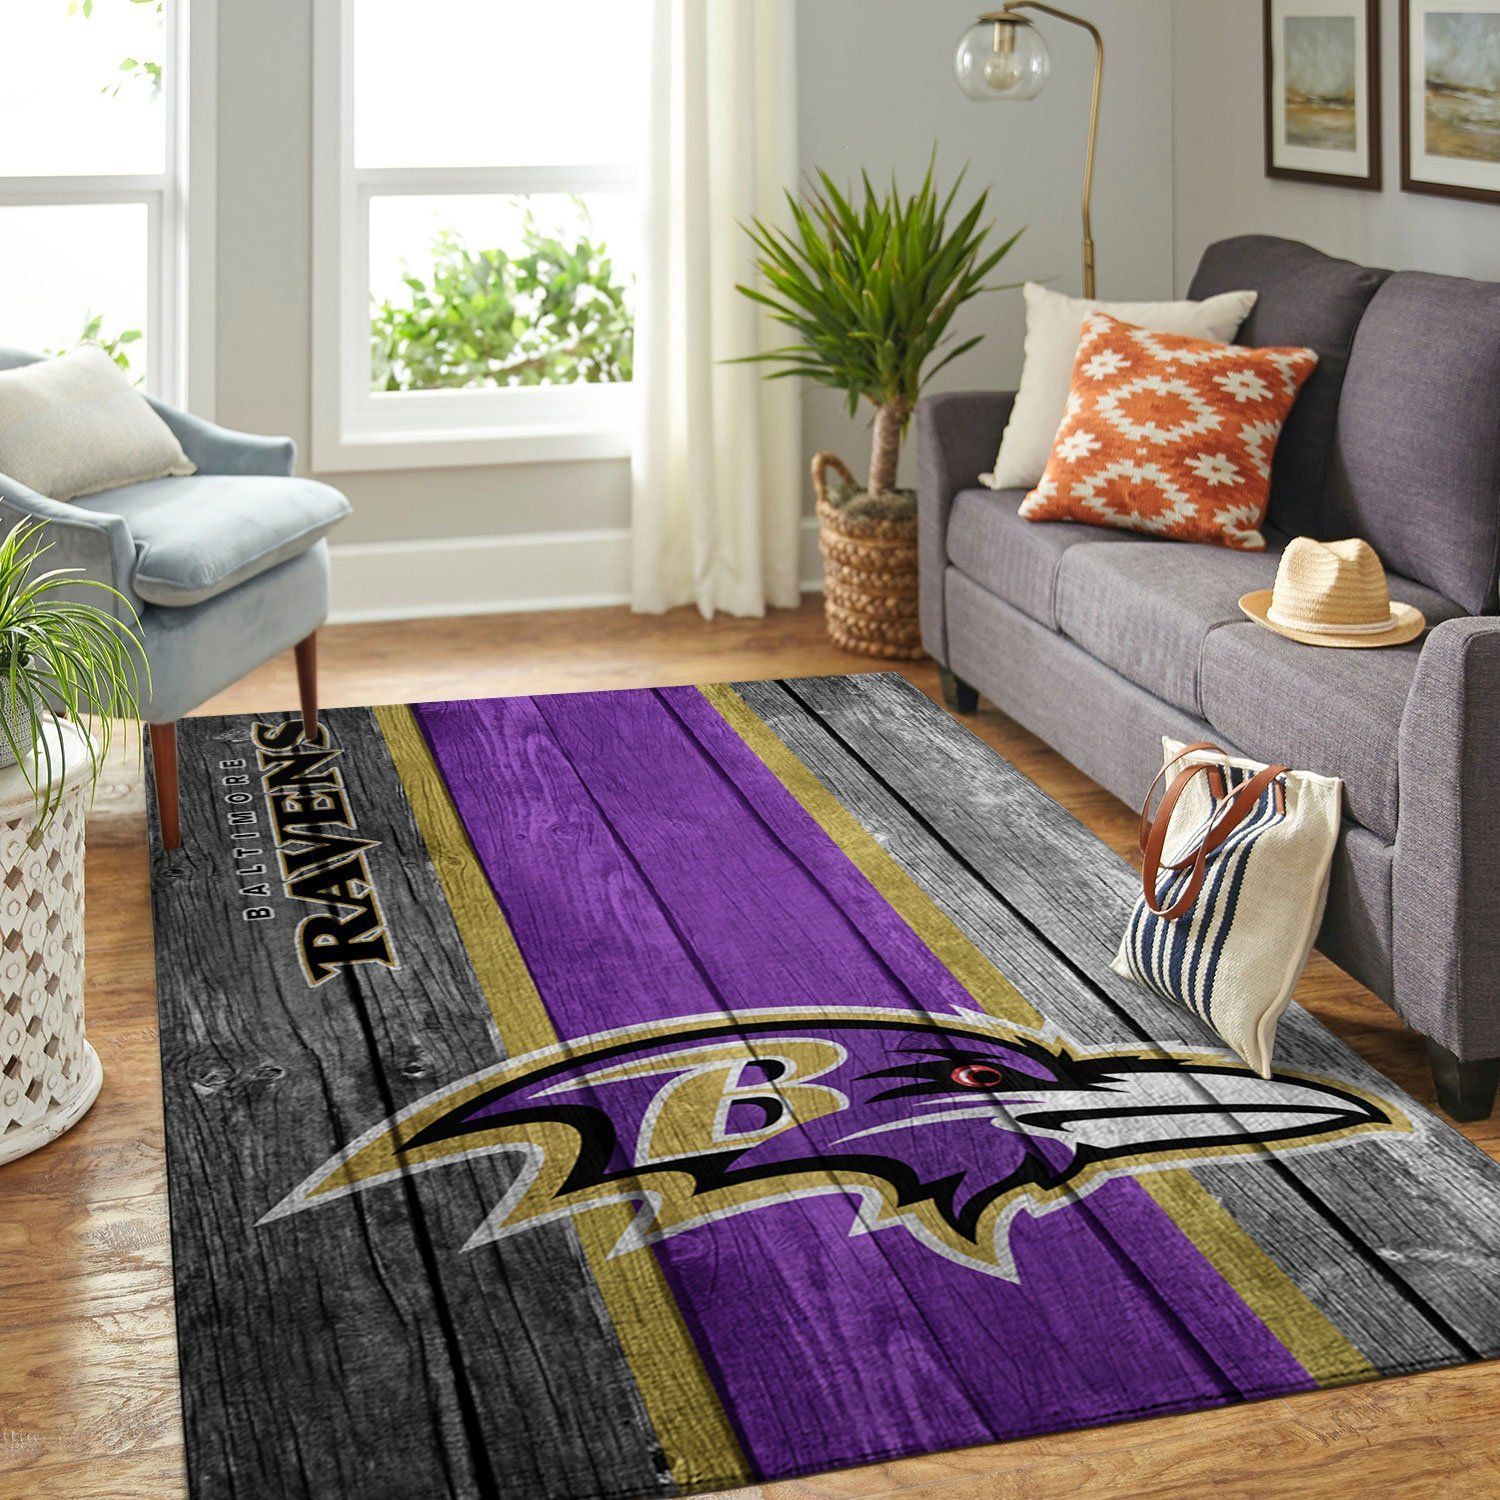 Baltimore Ravens Nfl Team Logo Wooden Style Style Nice Gift Home Decor Rectangle Area Rug - Indoor Outdoor Rugs